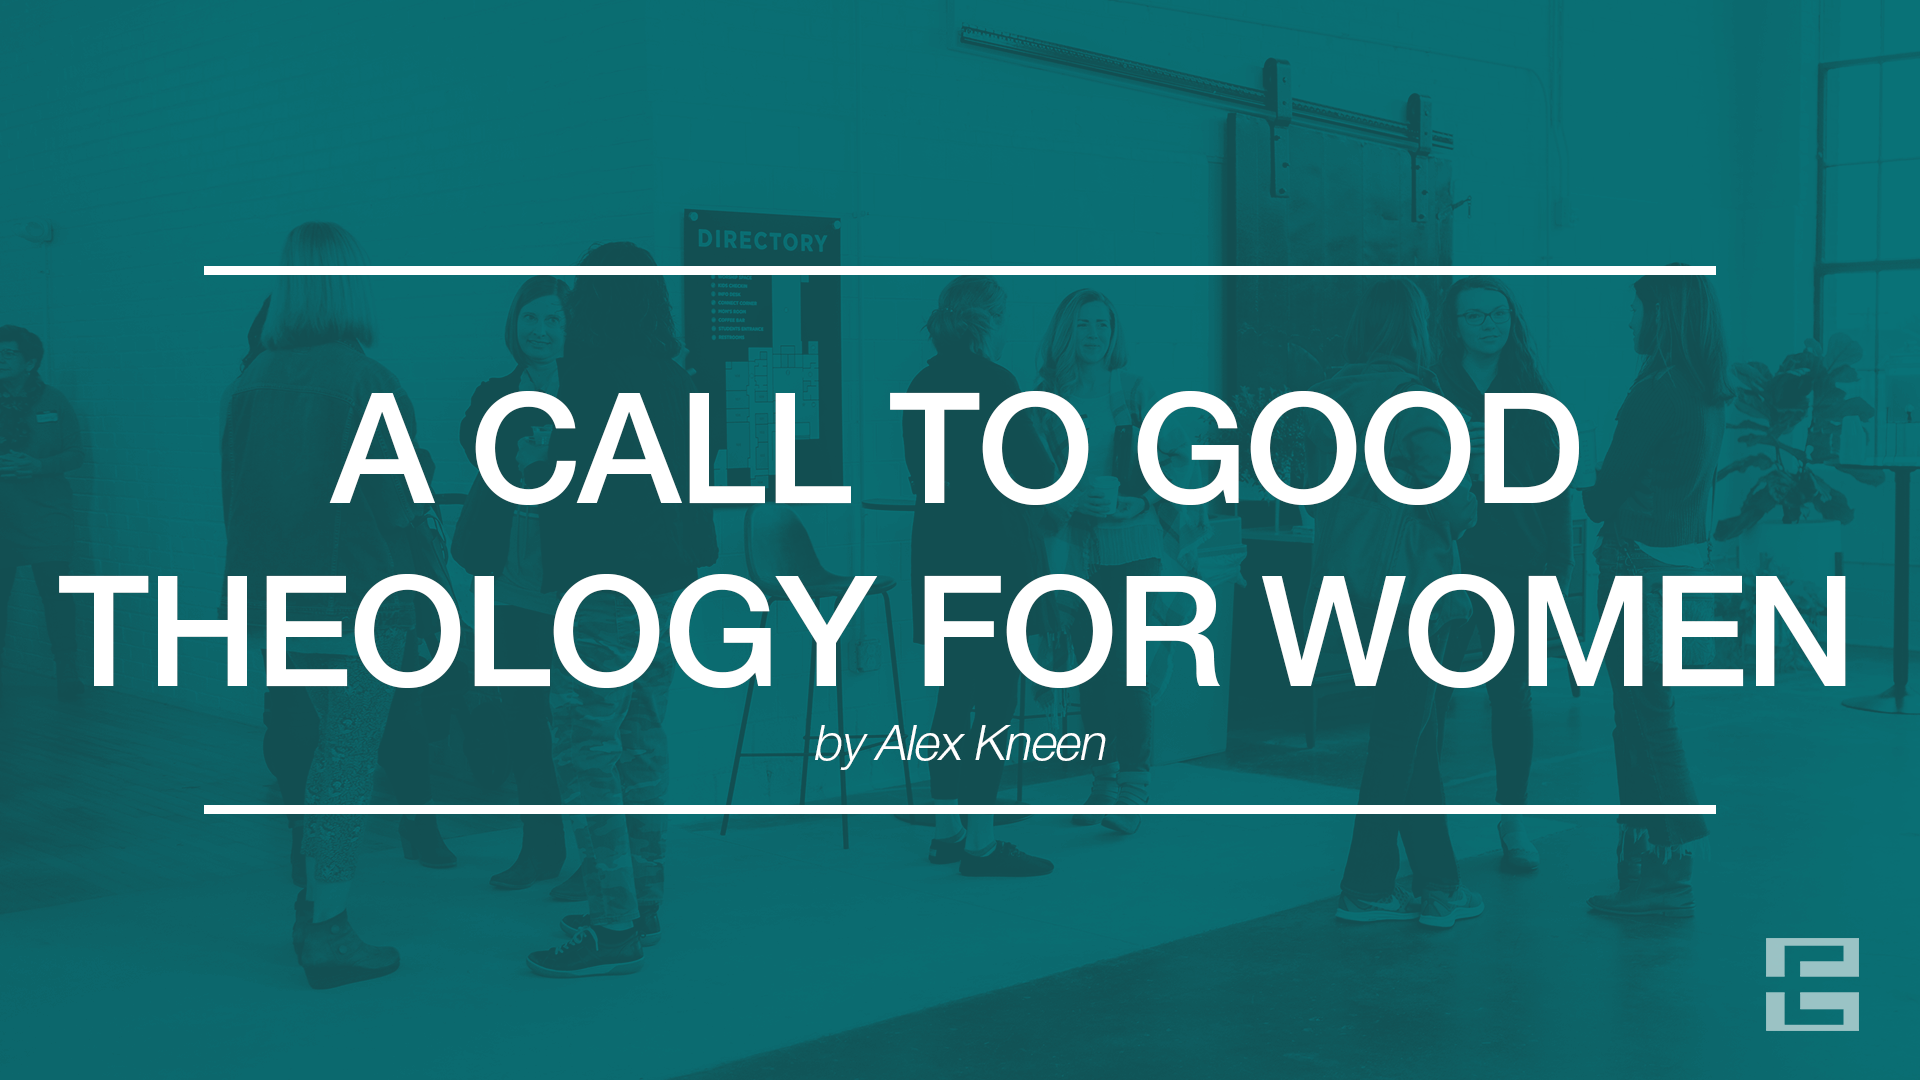 A Call to Good Theology for Women